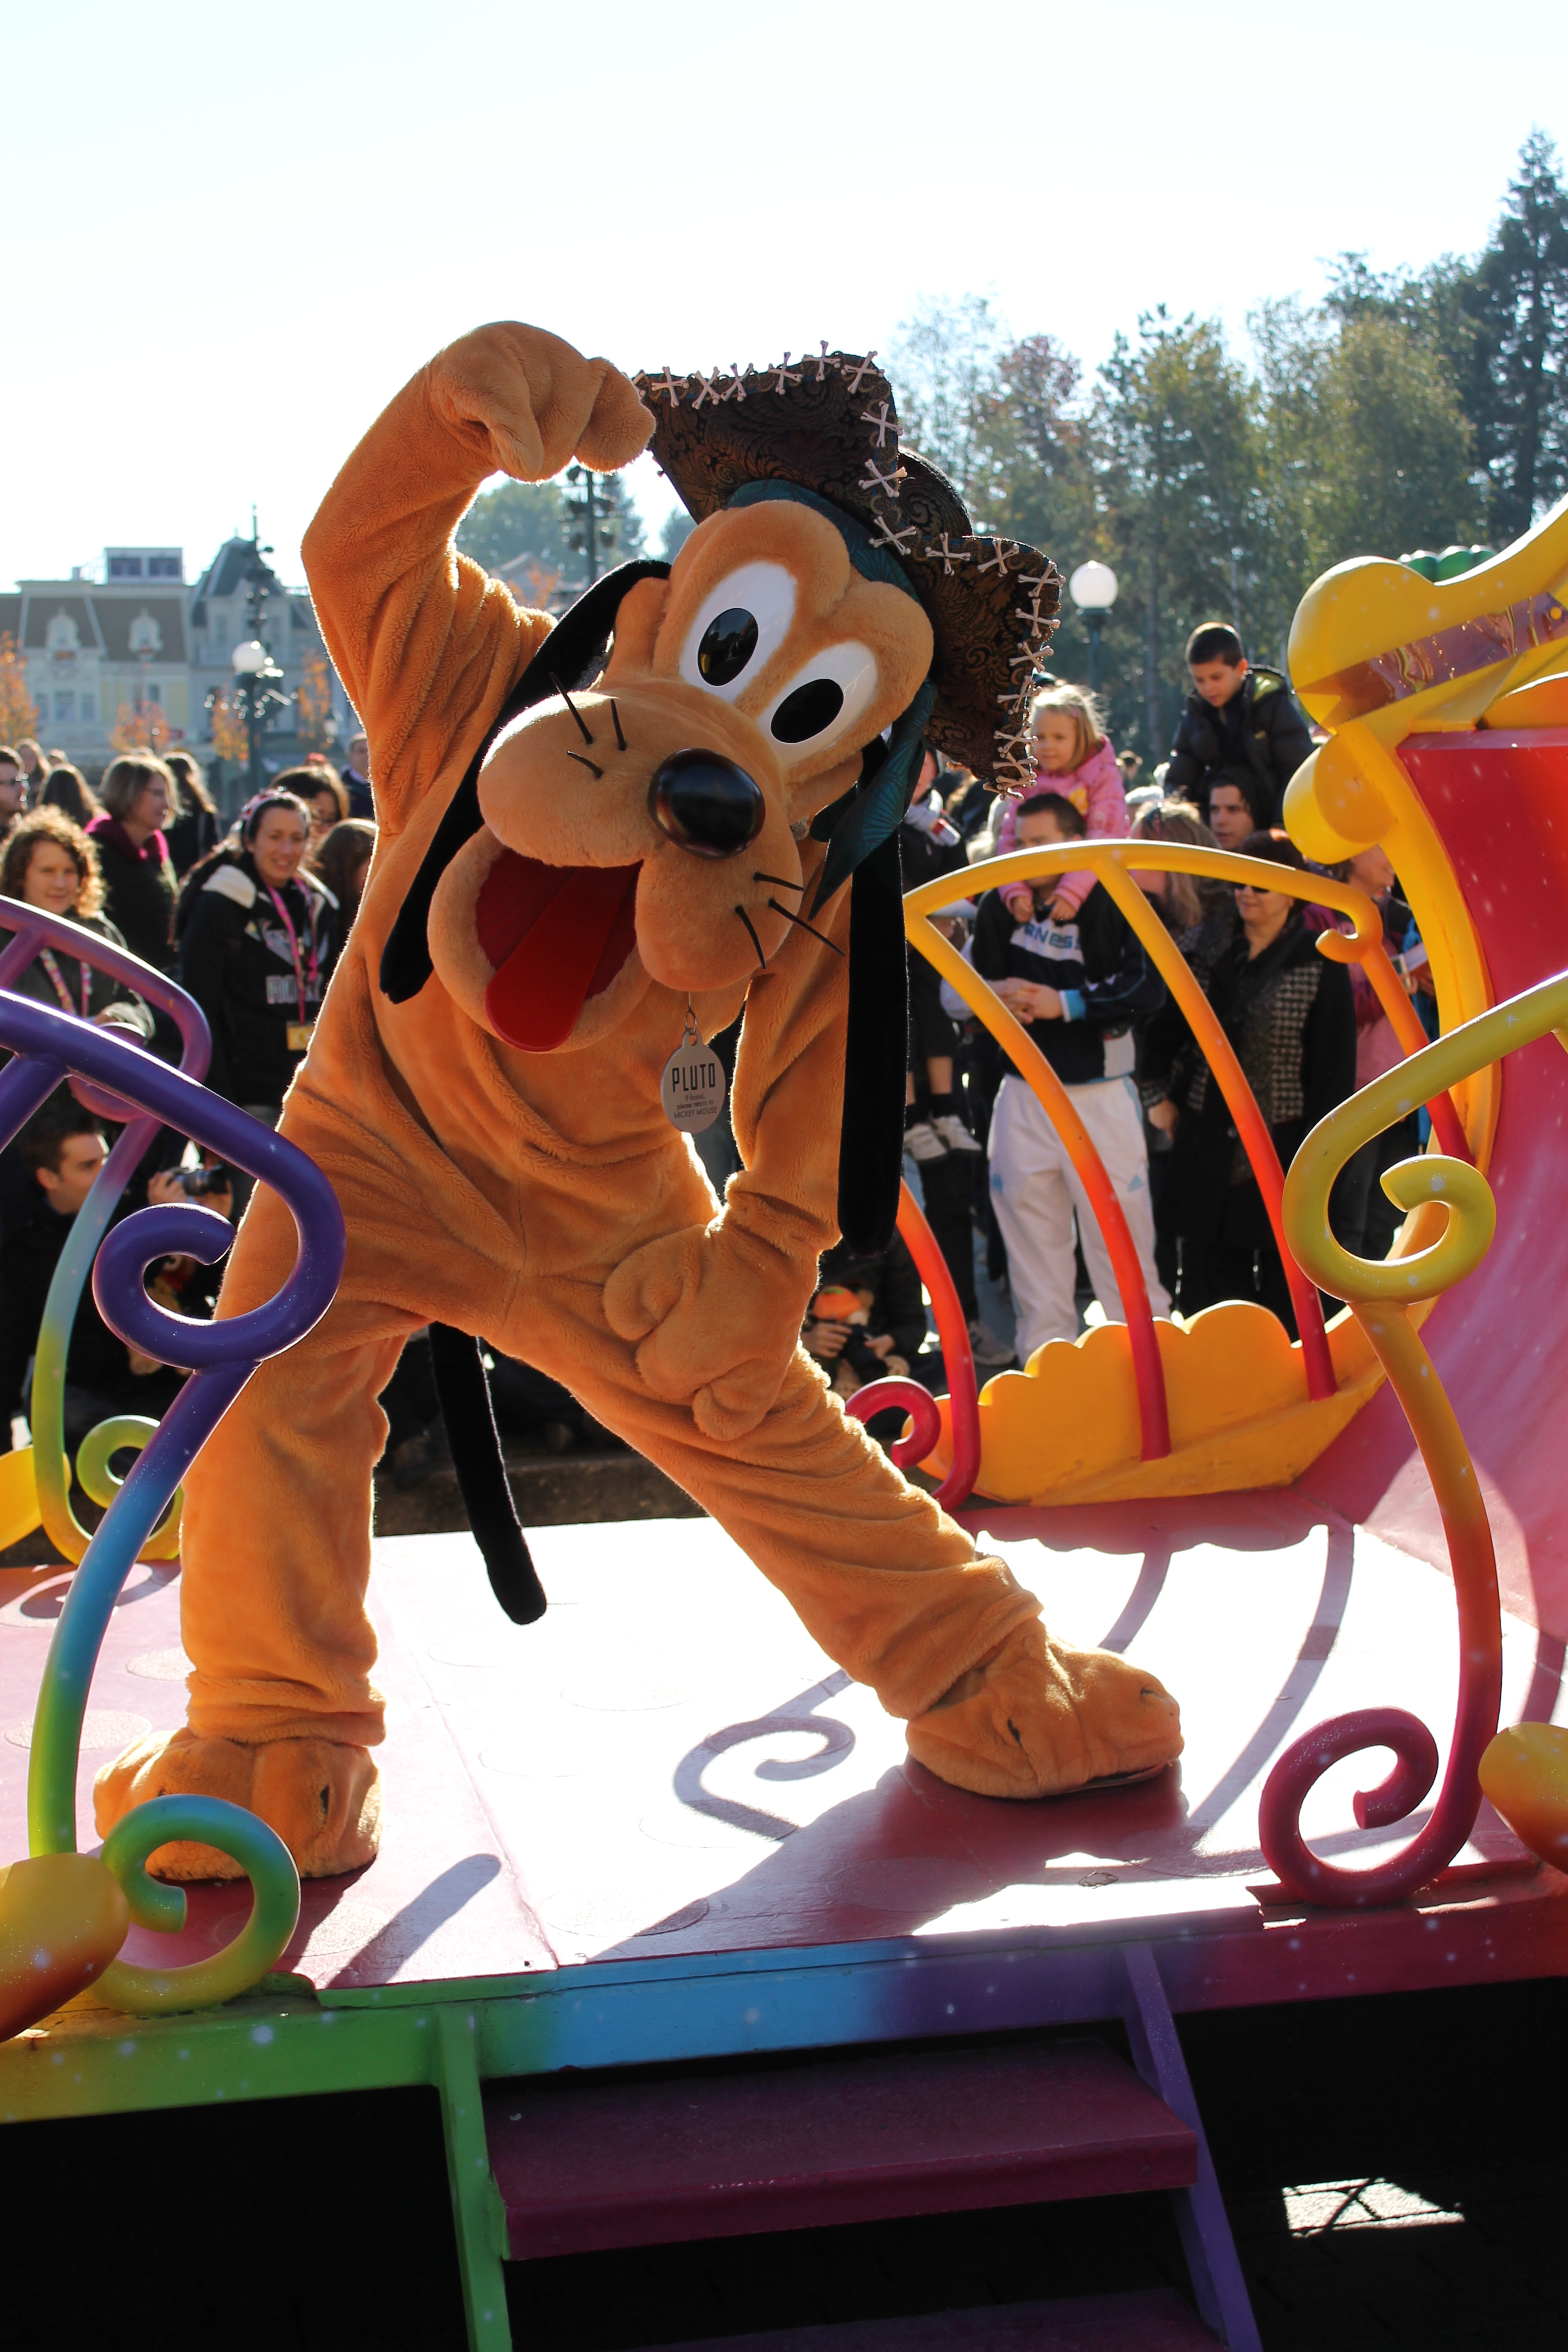 Pluto wearing a Pirate hat; this was during a special version of the Character Express on the 31st of October 2012.